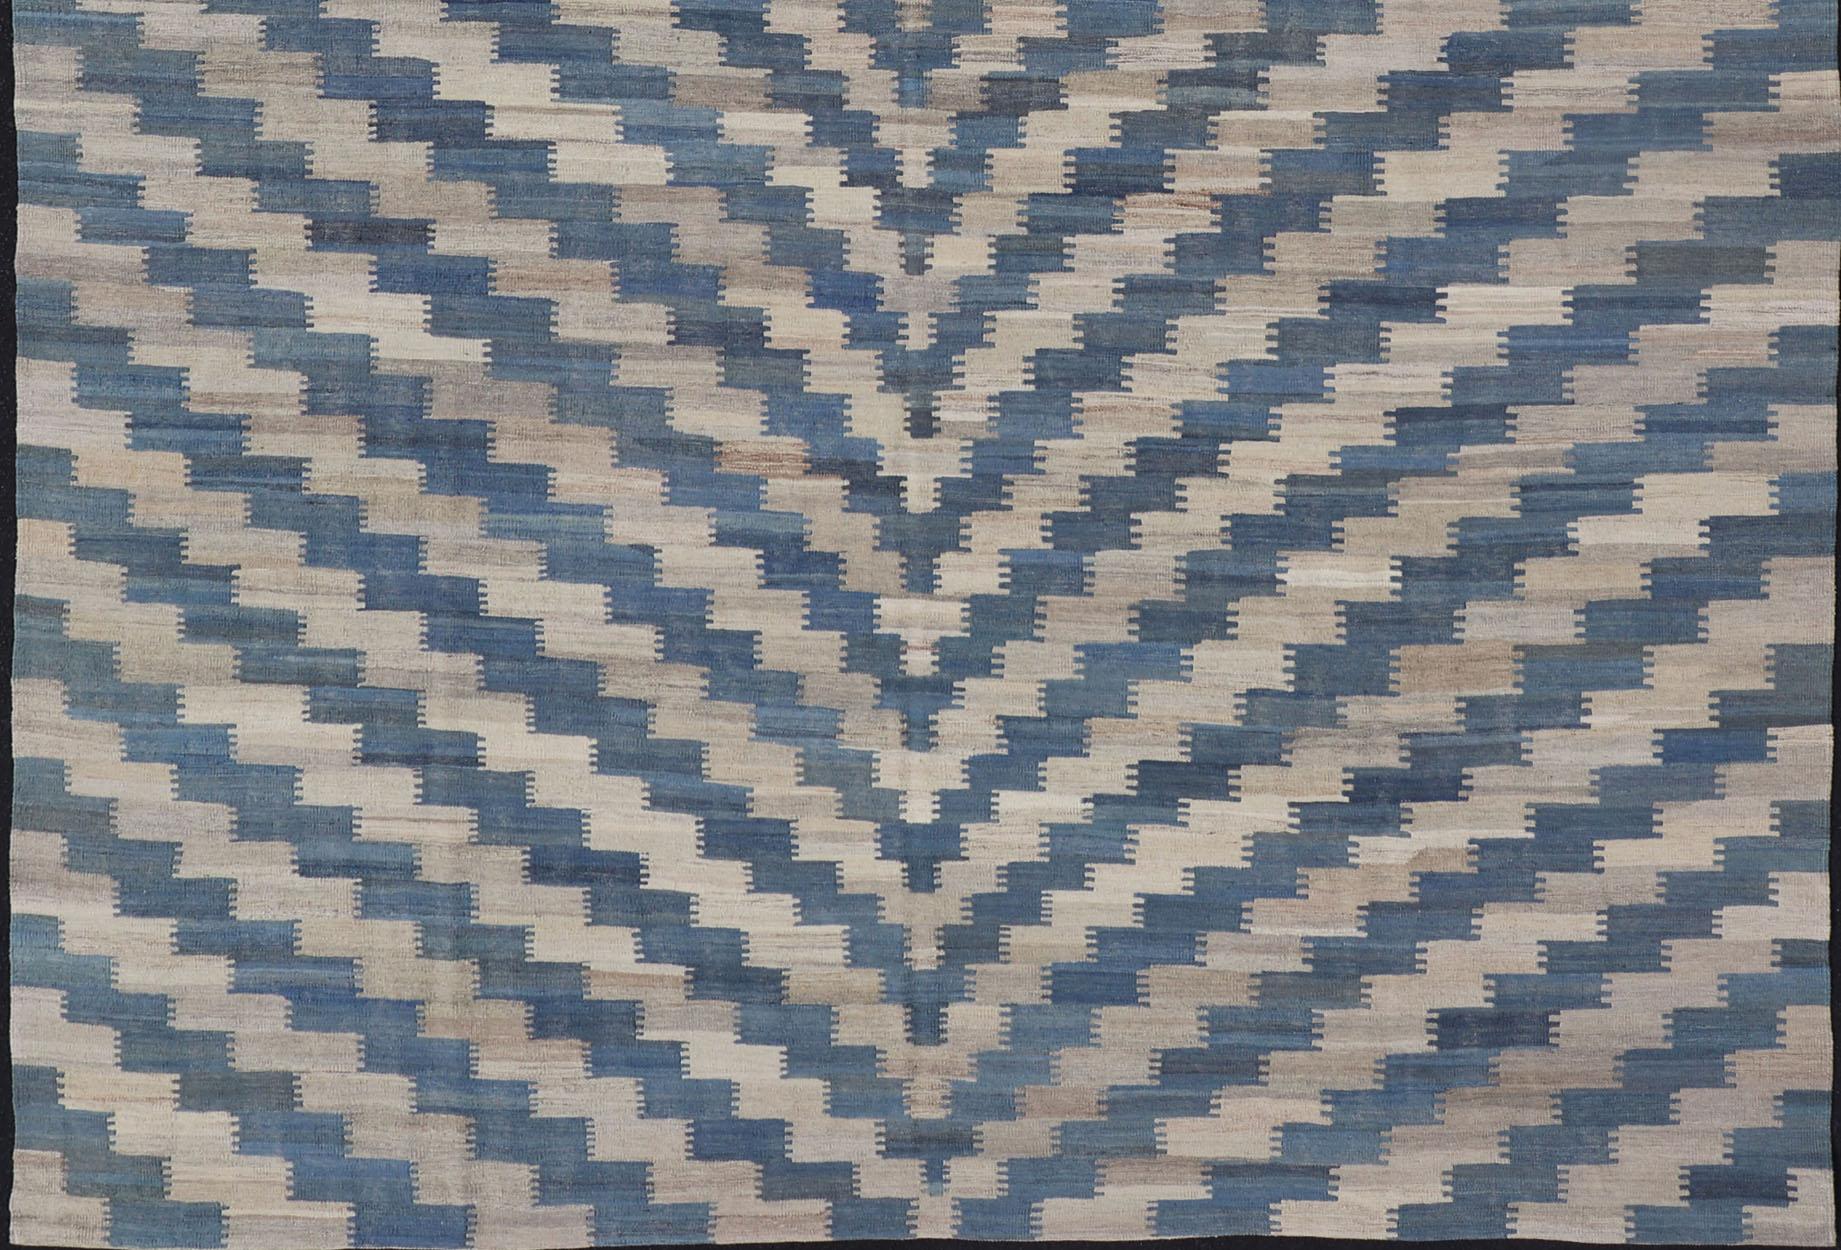 Hand-Woven Flat-Weave Kilim Rug with a Modern Design in Blue, and Creams For Sale